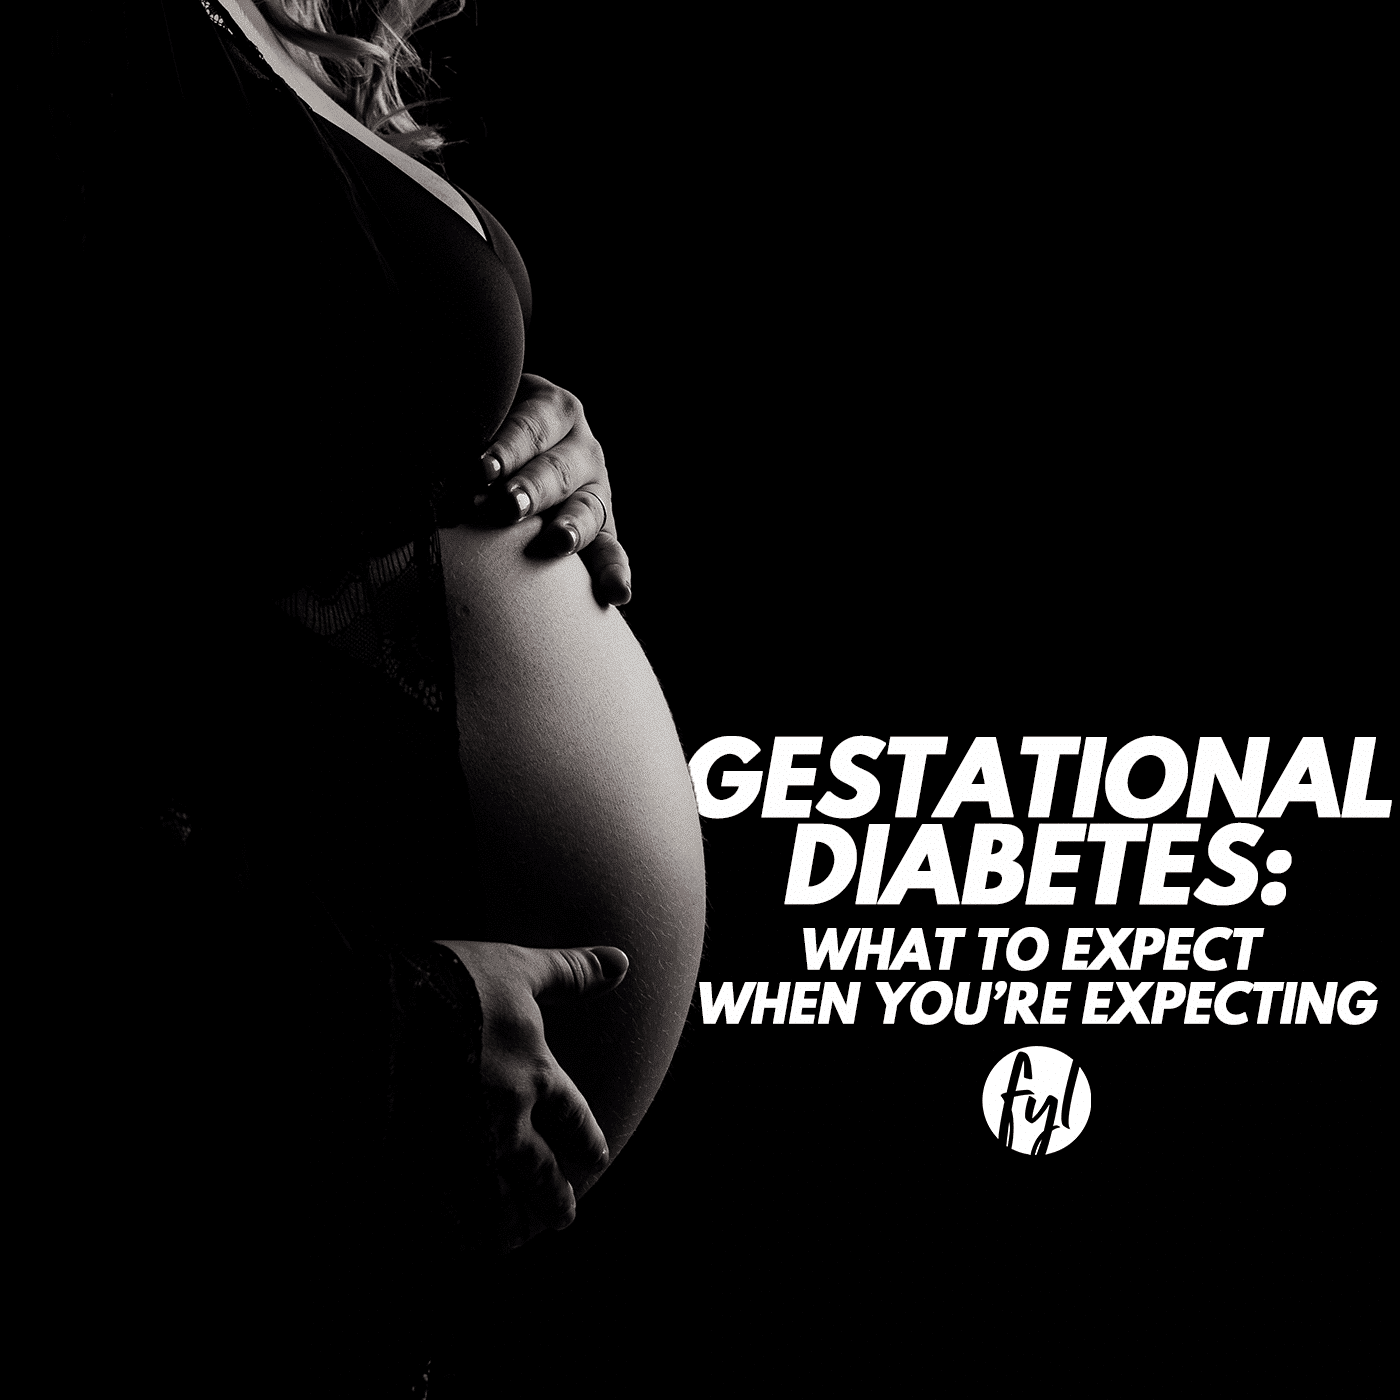 Gestational Diabetes: What to Expect When You’re Expecting